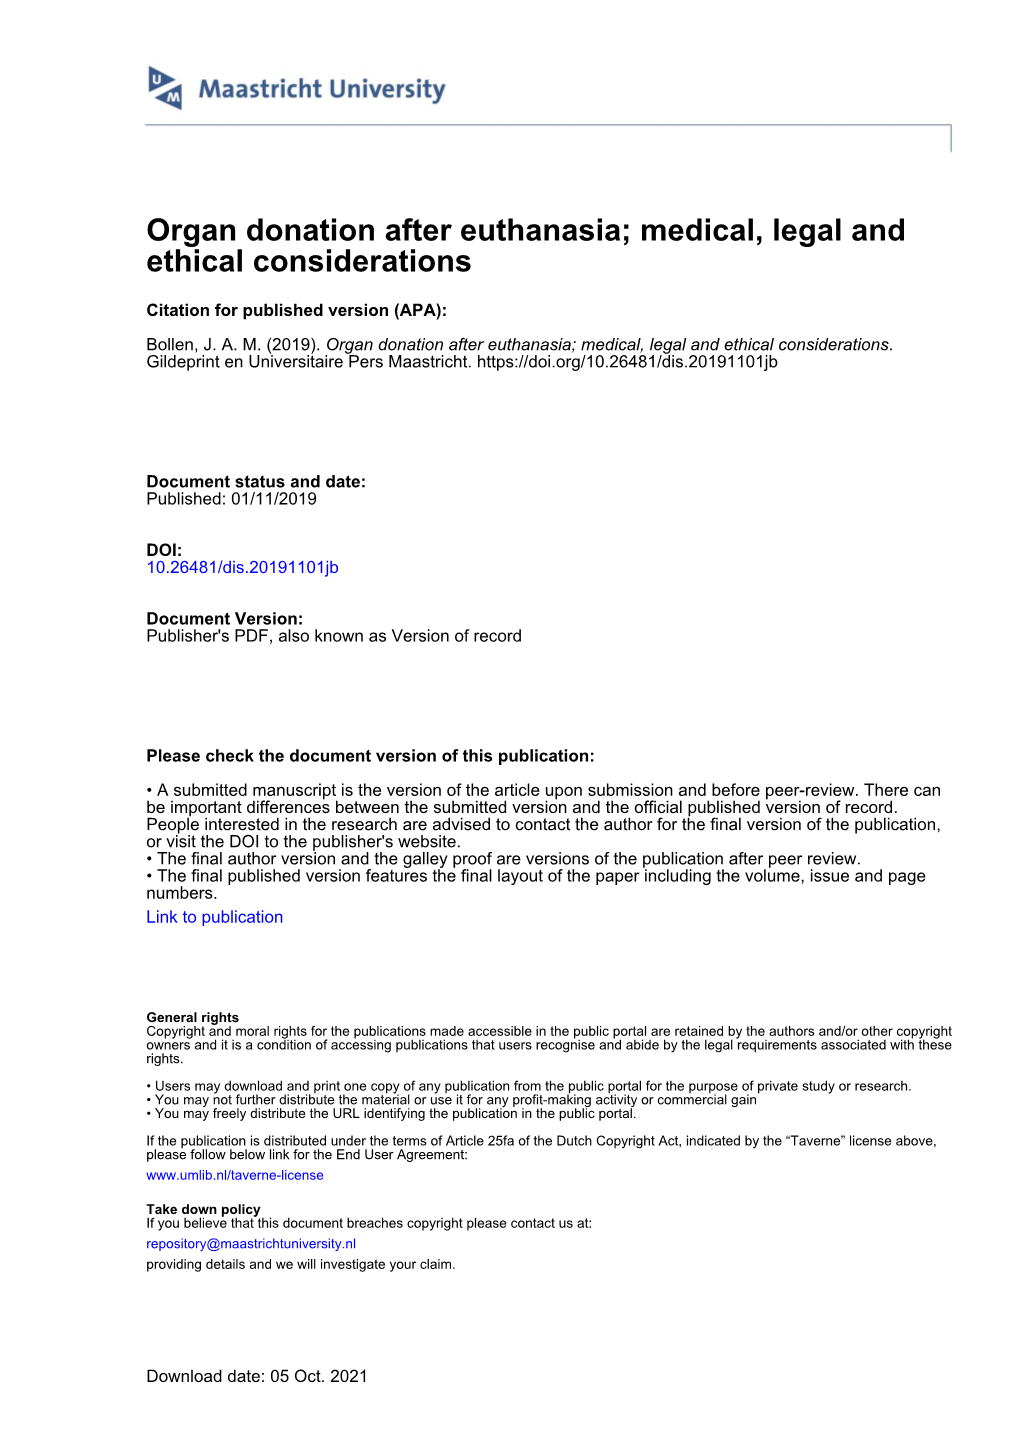 Organ Donation After Euthanasia; Medical, Legal and Ethical Considerations